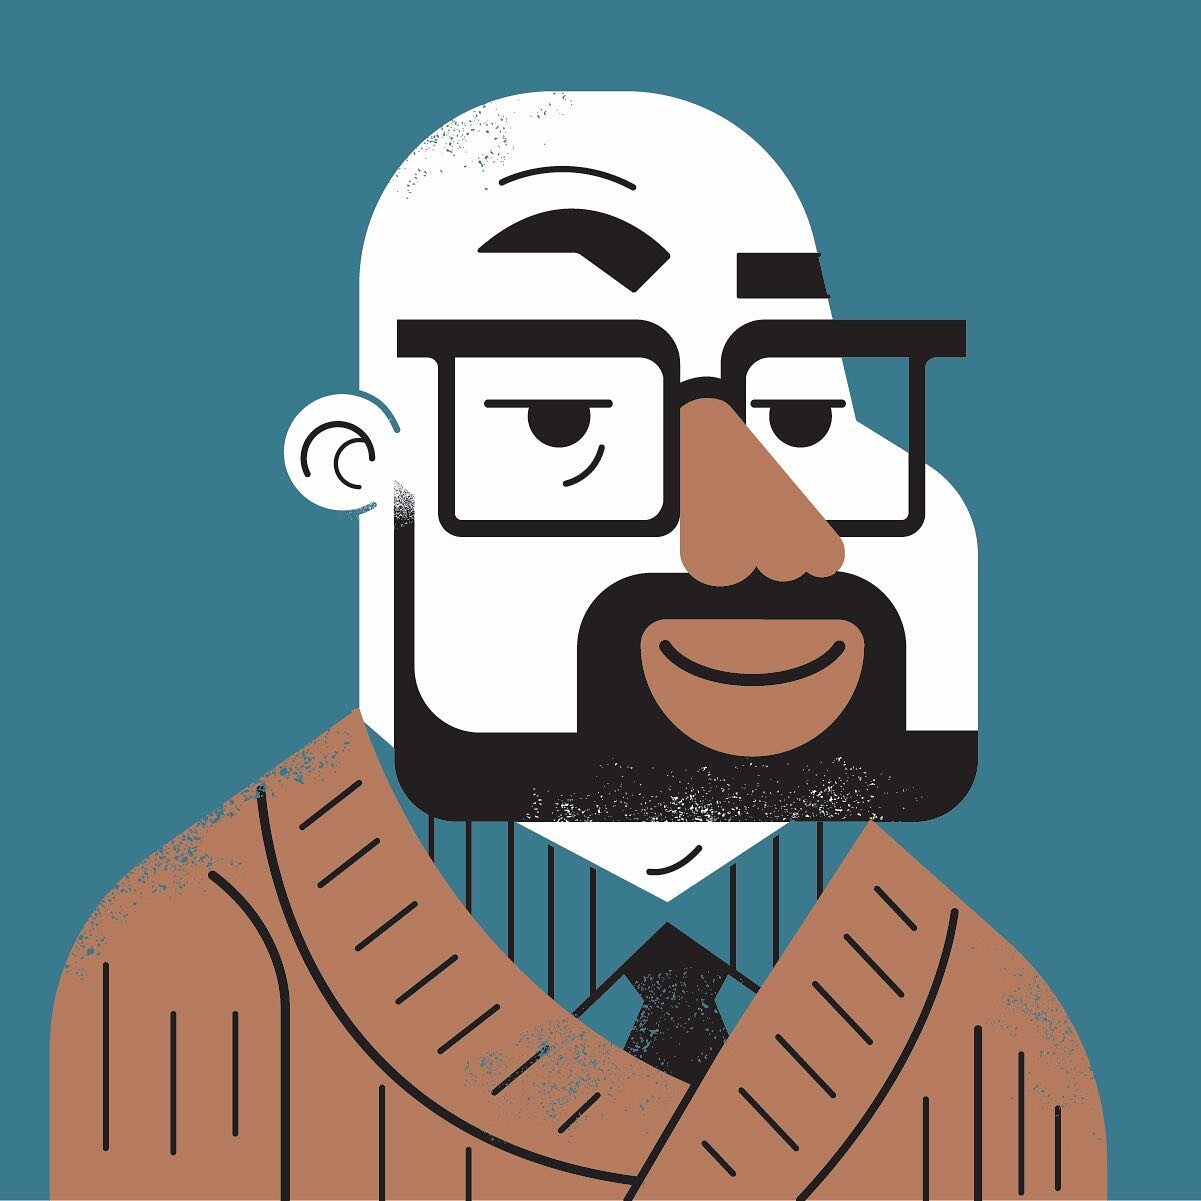 Founder of AAGD Terrance Moline. Really cool dude and one of the best professionals I&rsquo;ve ever had the pleasure of working with. #aagd #chuckscott #africanamericandesigner #illustrations #avatar #profile #portrait #caricature #chuck_doodles #ado